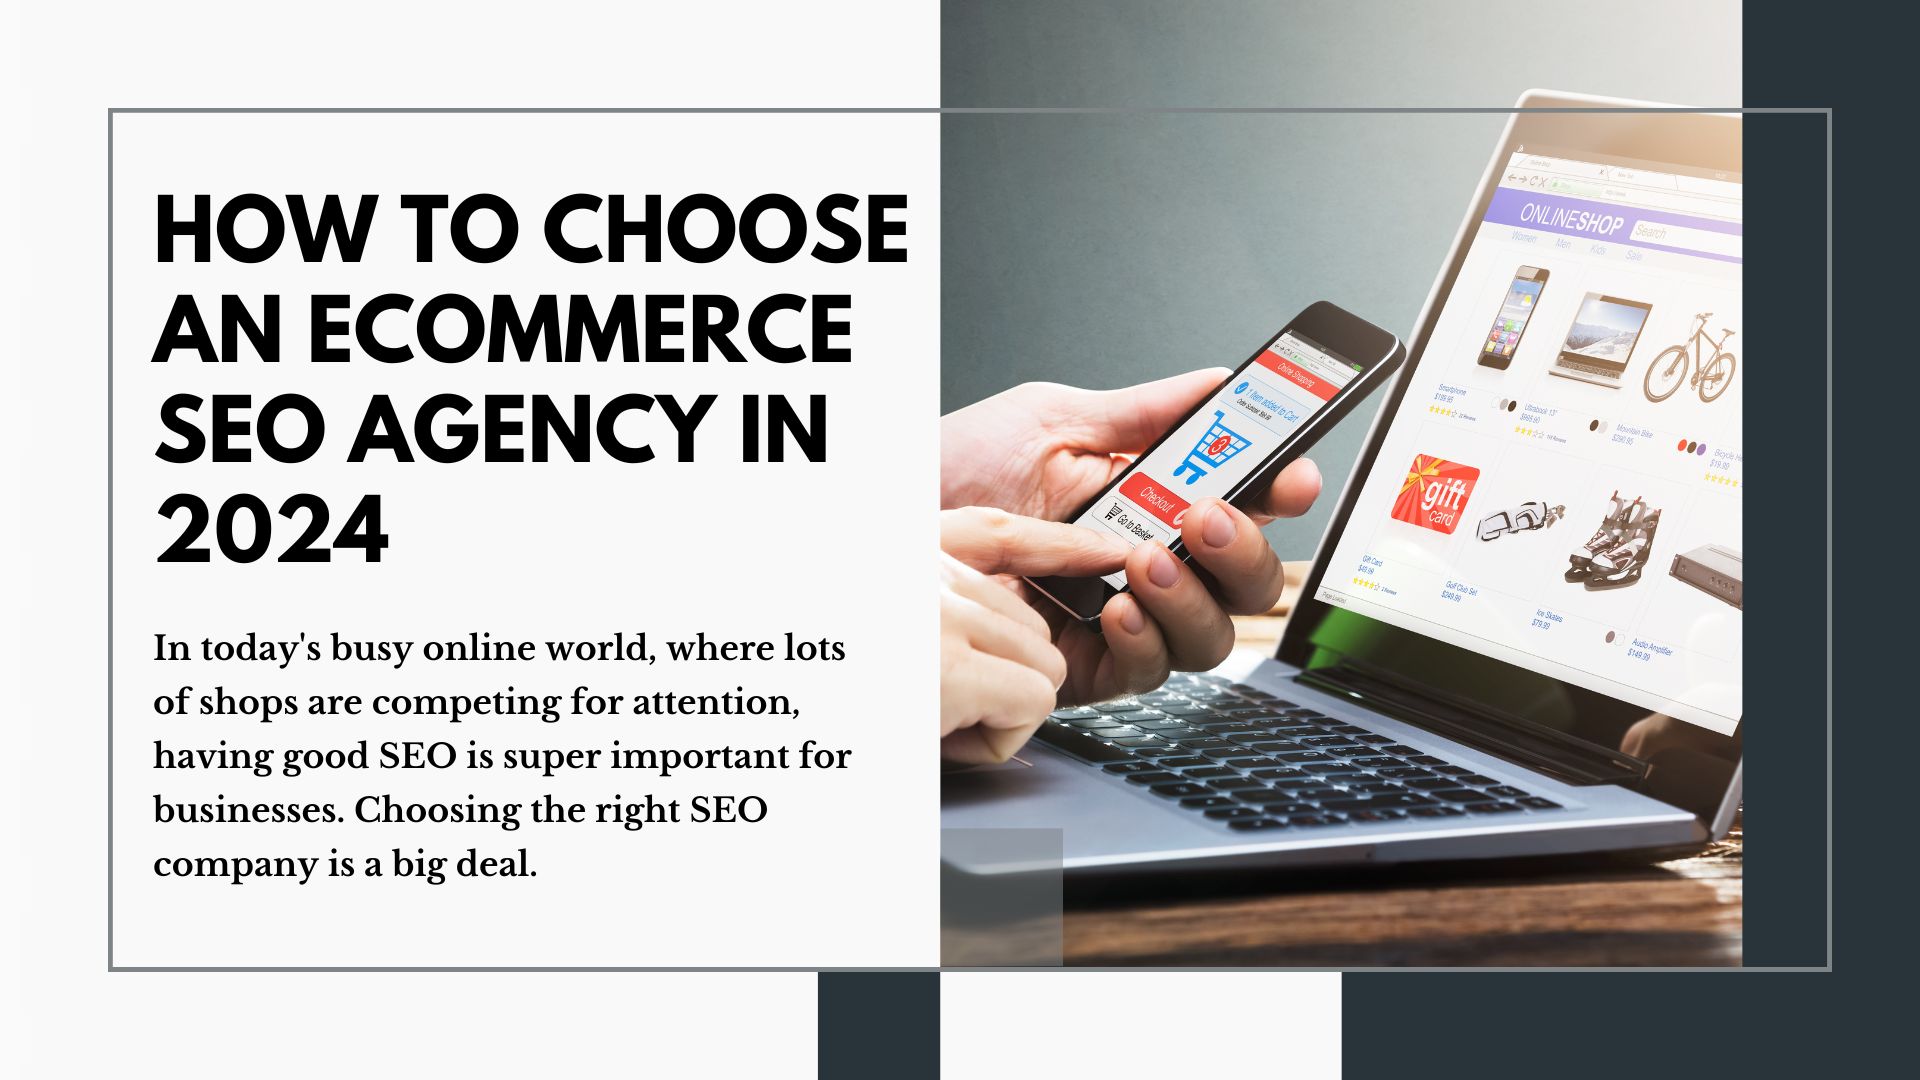 How To Choose An Ecommerce SEO Agency in 2024